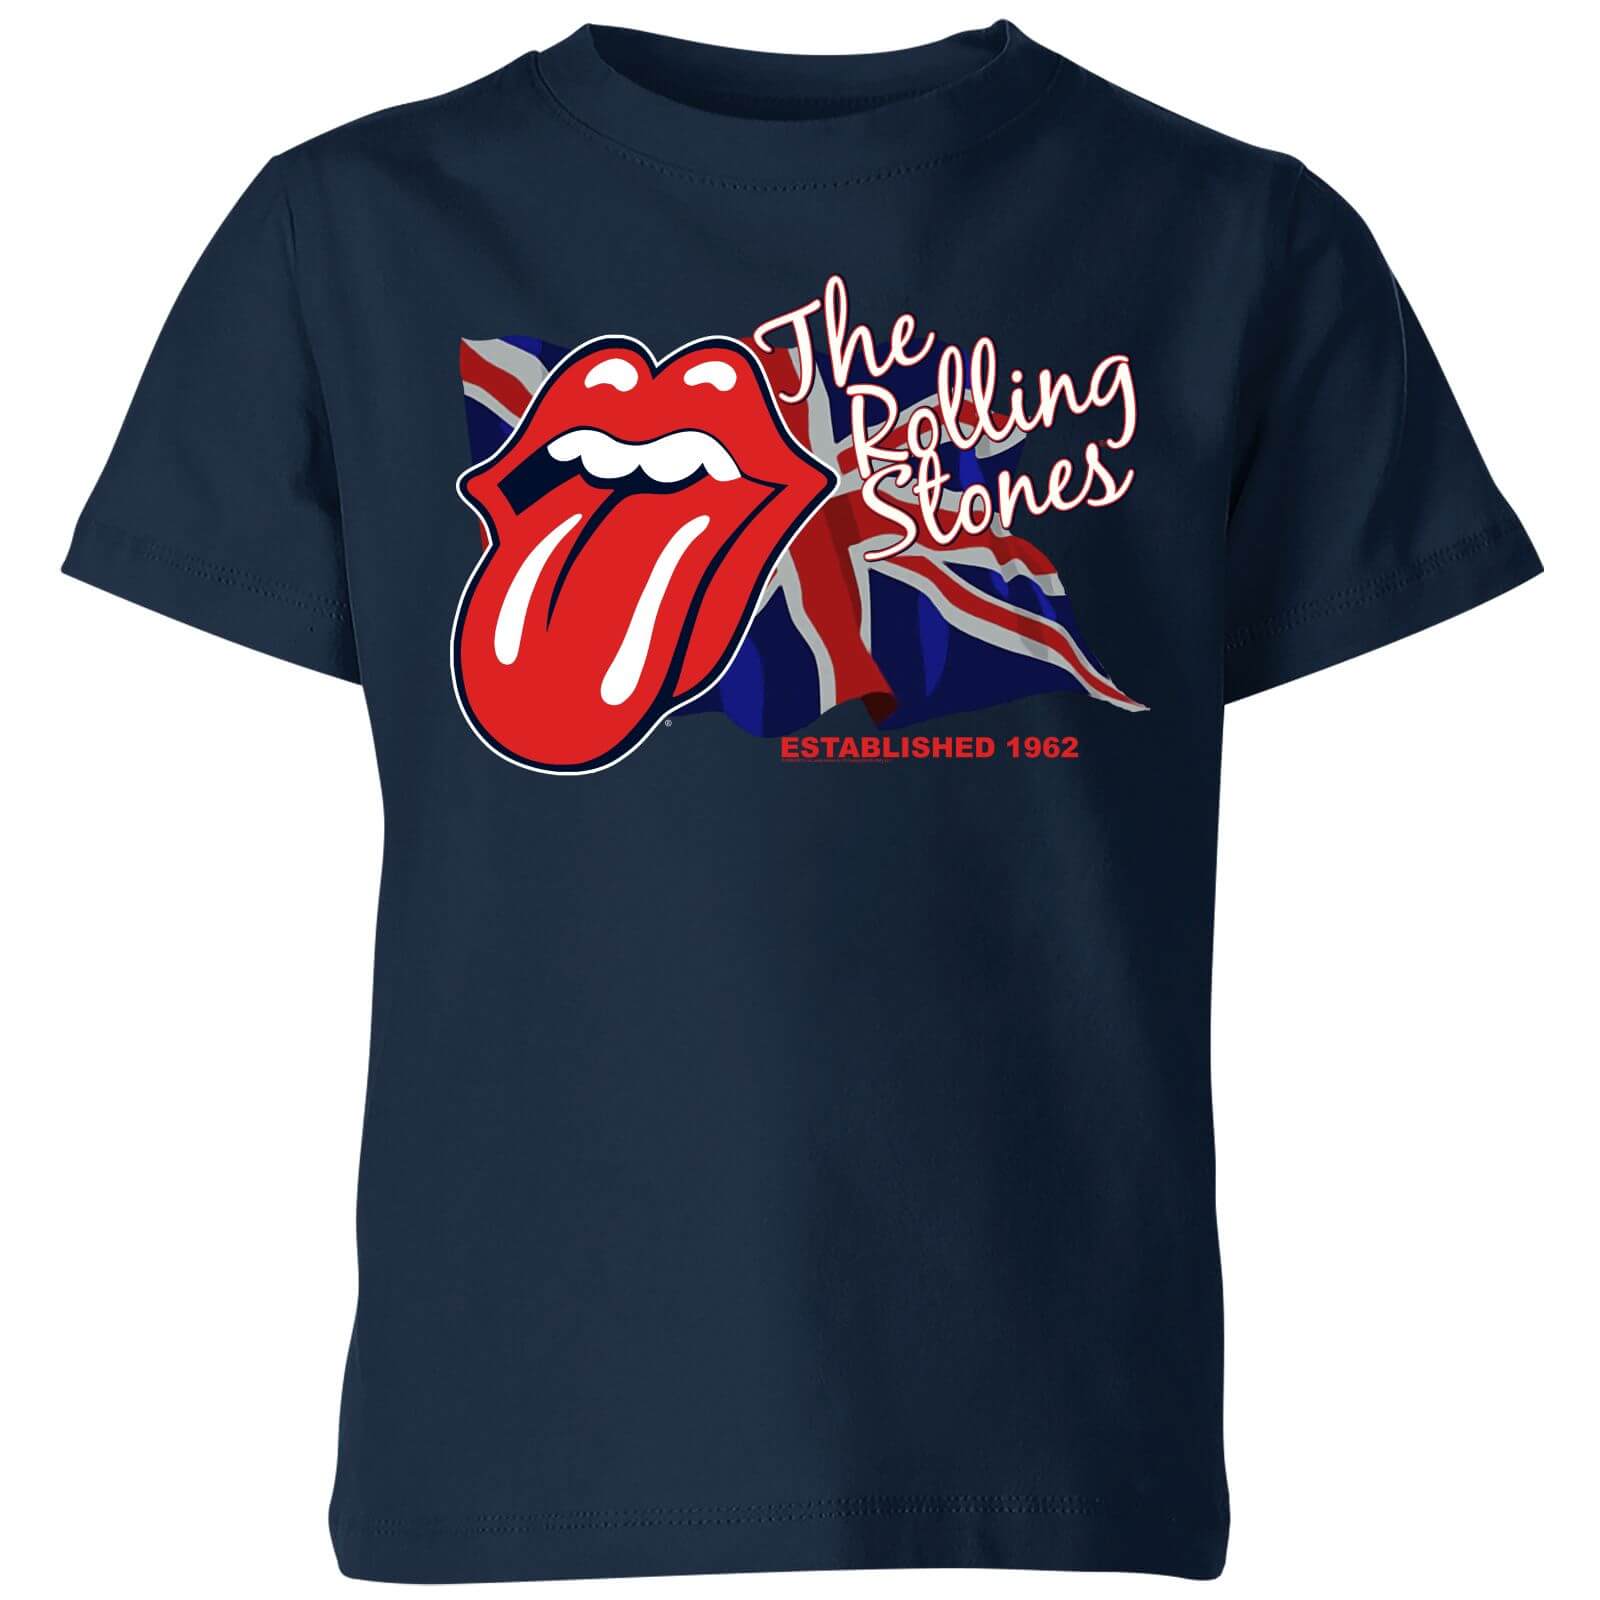 Rolling Stones Lick The Flag Kids' T-Shirt - Navy - 9-10 Years - Navy